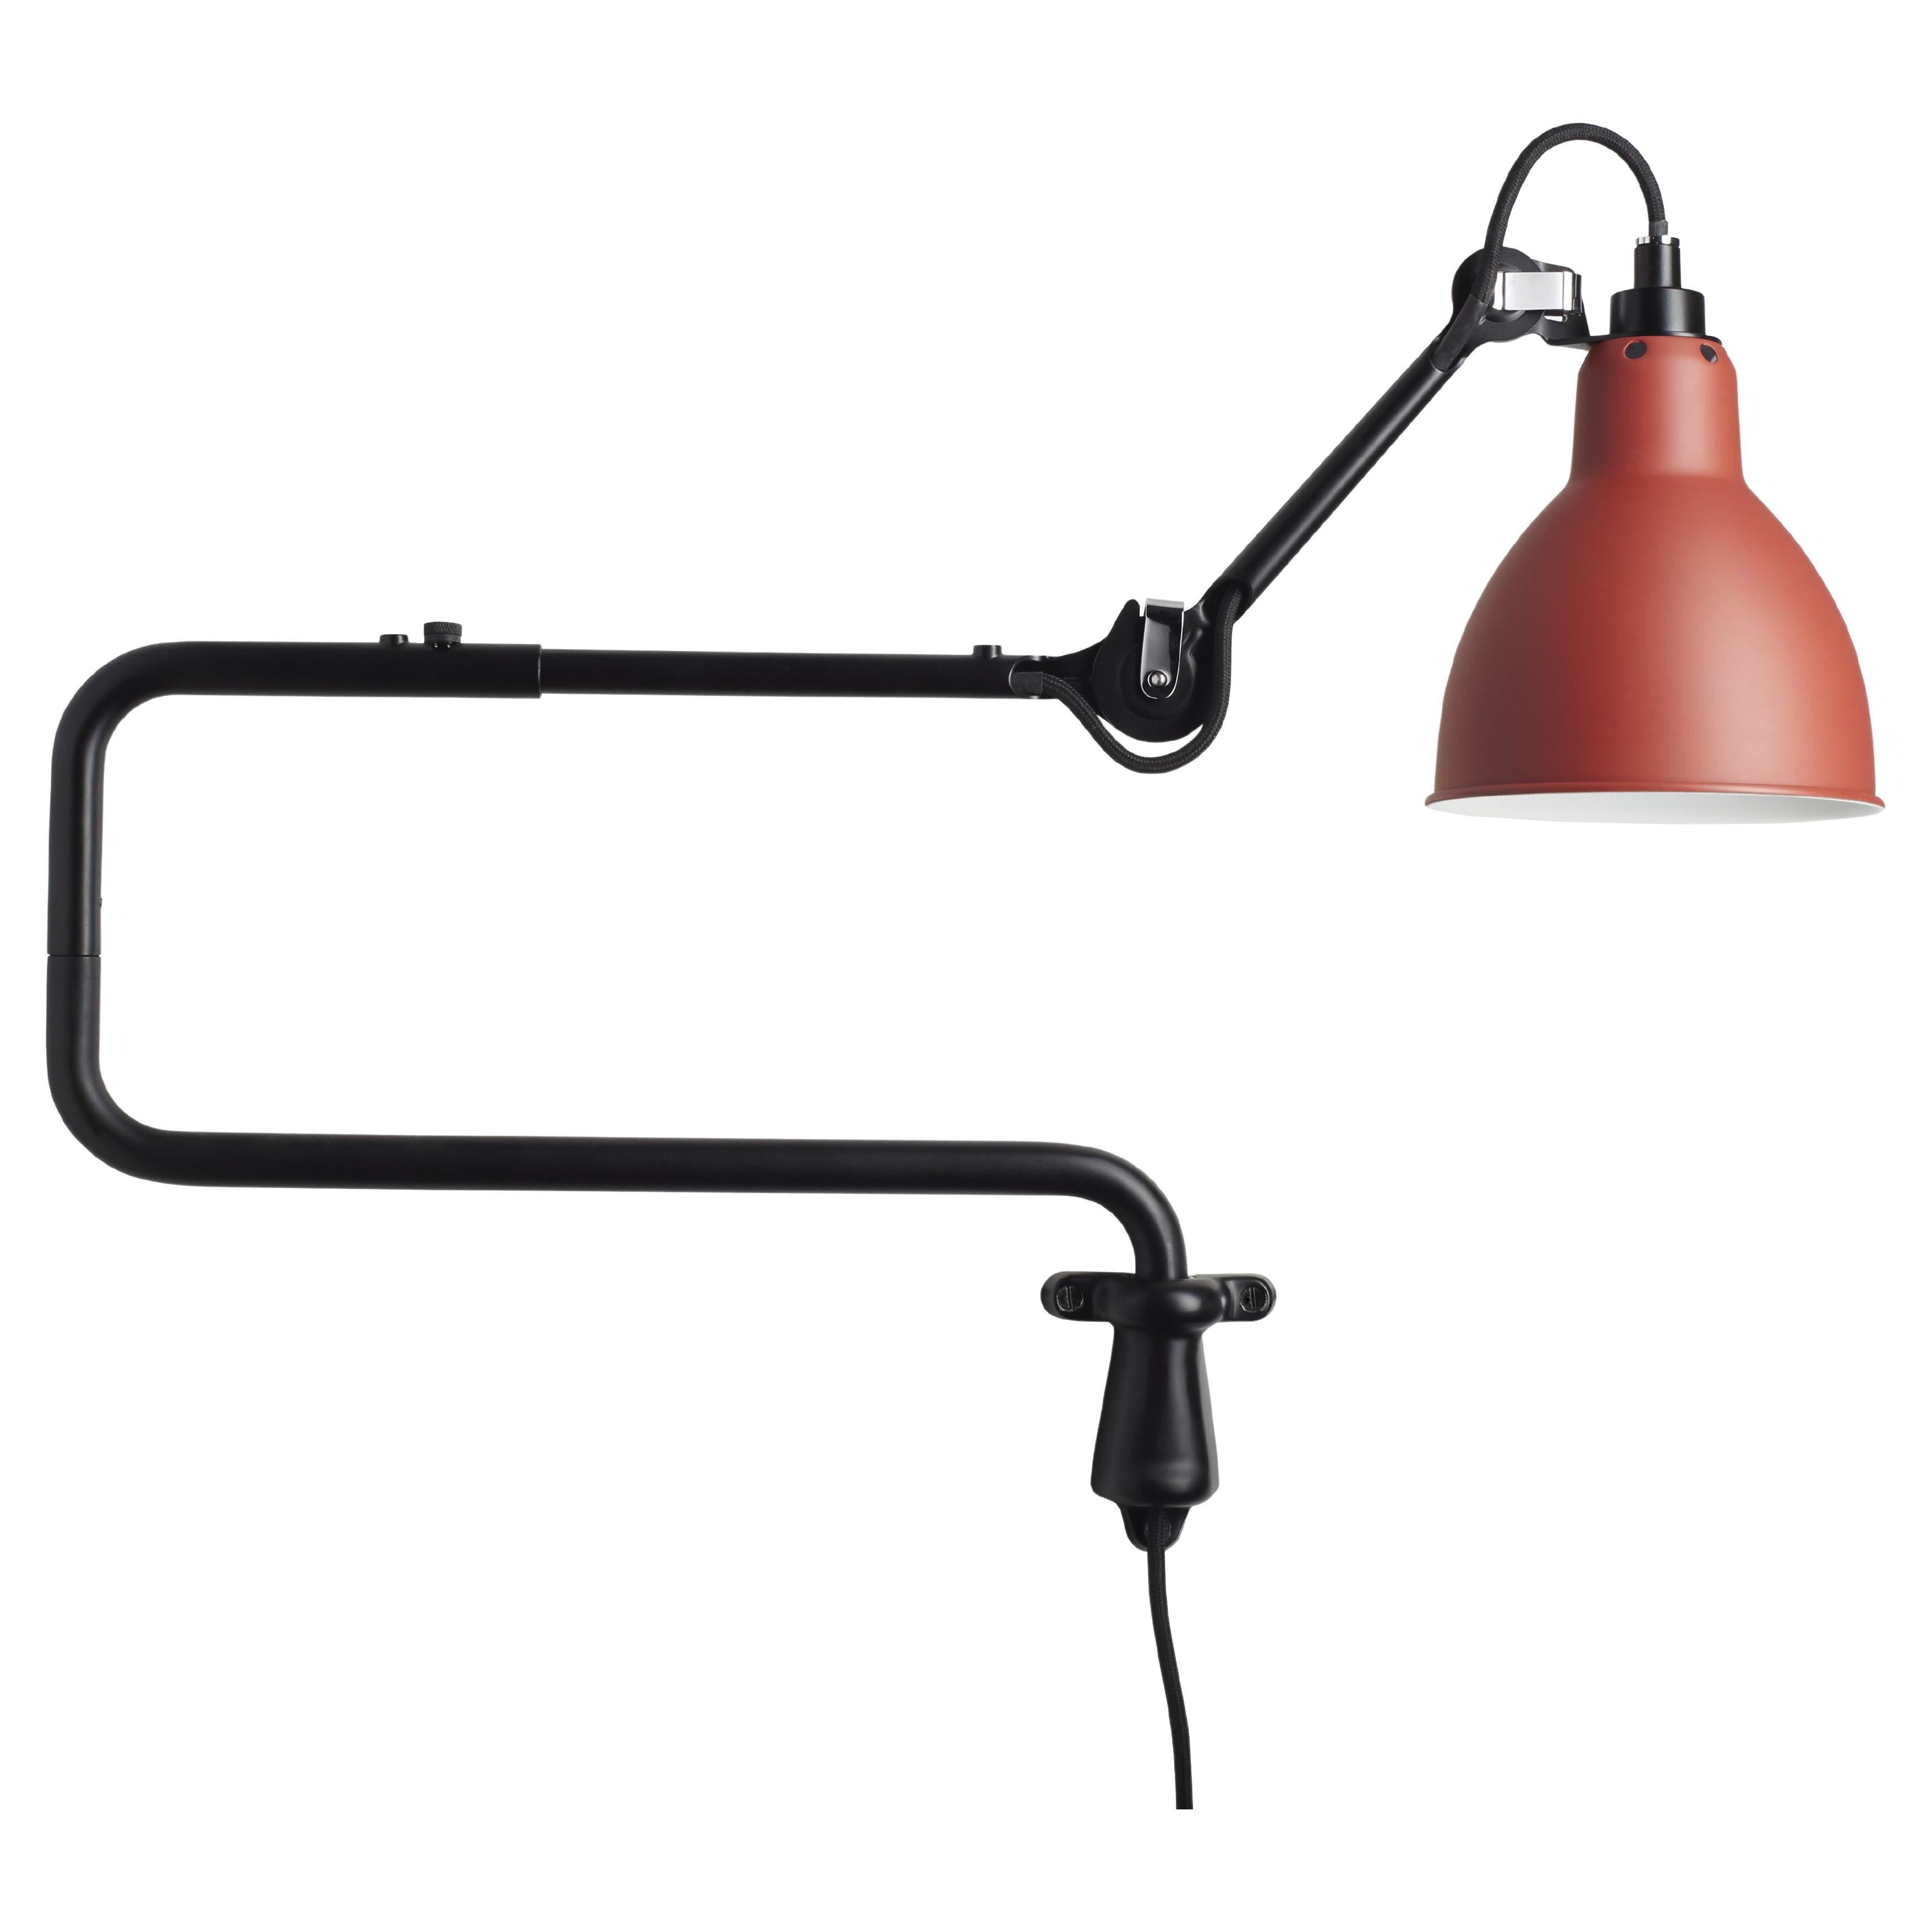 DCW Editions La Lampe Gras N°303 Wall Lamp in Black Arm and Red Shade